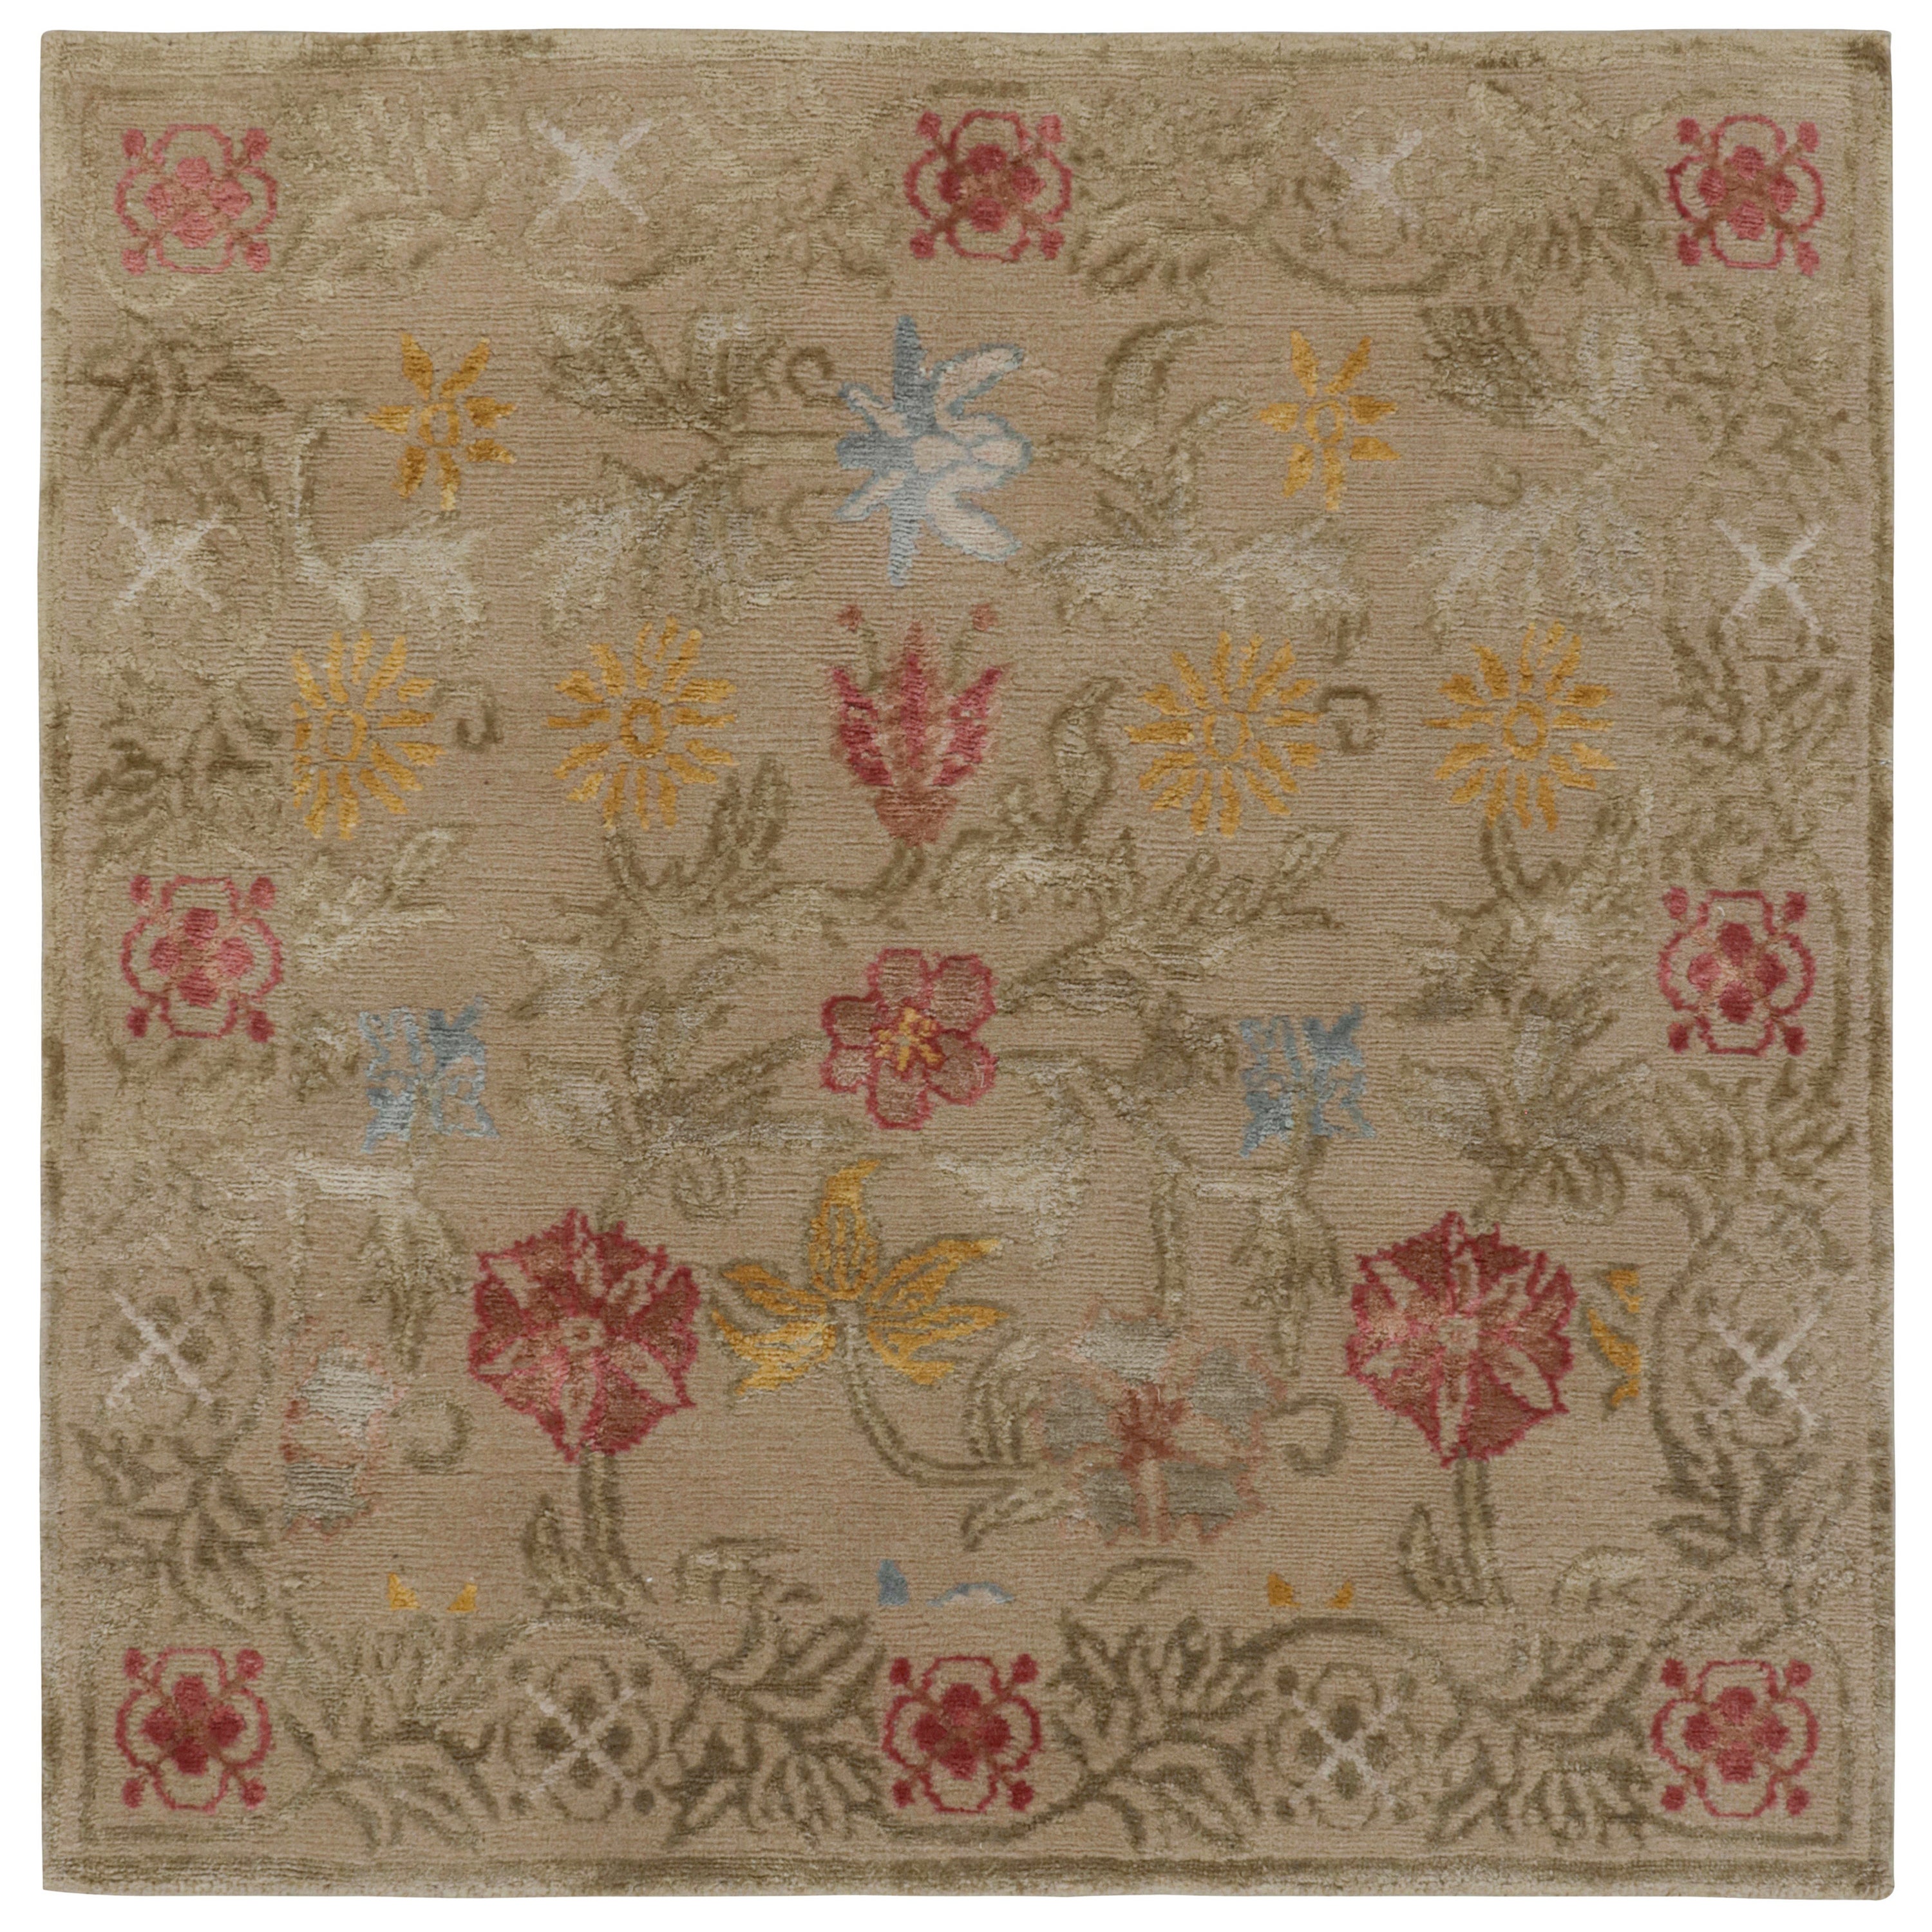 Rug & Kilim’s Spanish European Style Square Rug with Floral Patterns “Bilbao”